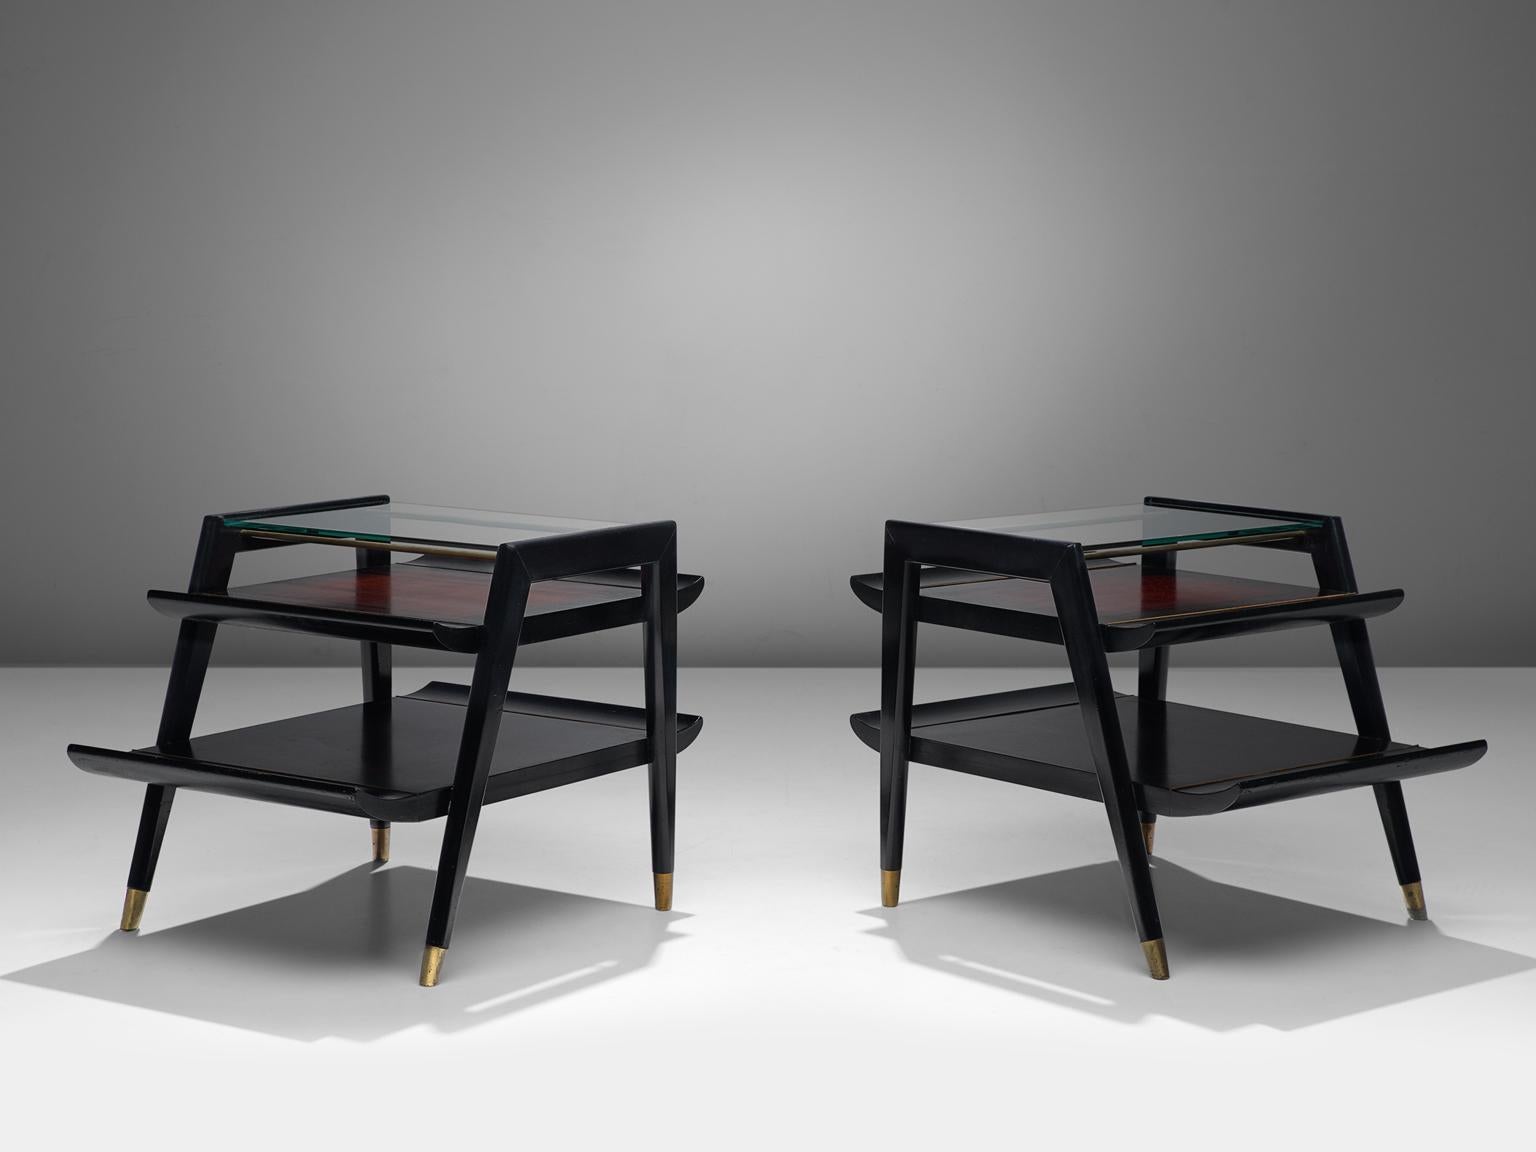 Gordon's fine Furniture, side tables, stained black wood and glass, 1960s, United States.

These ebonized side table are produced by Gordon's fine furniture in the 1960s in the United States and have characteristic curved shapes, that show strong